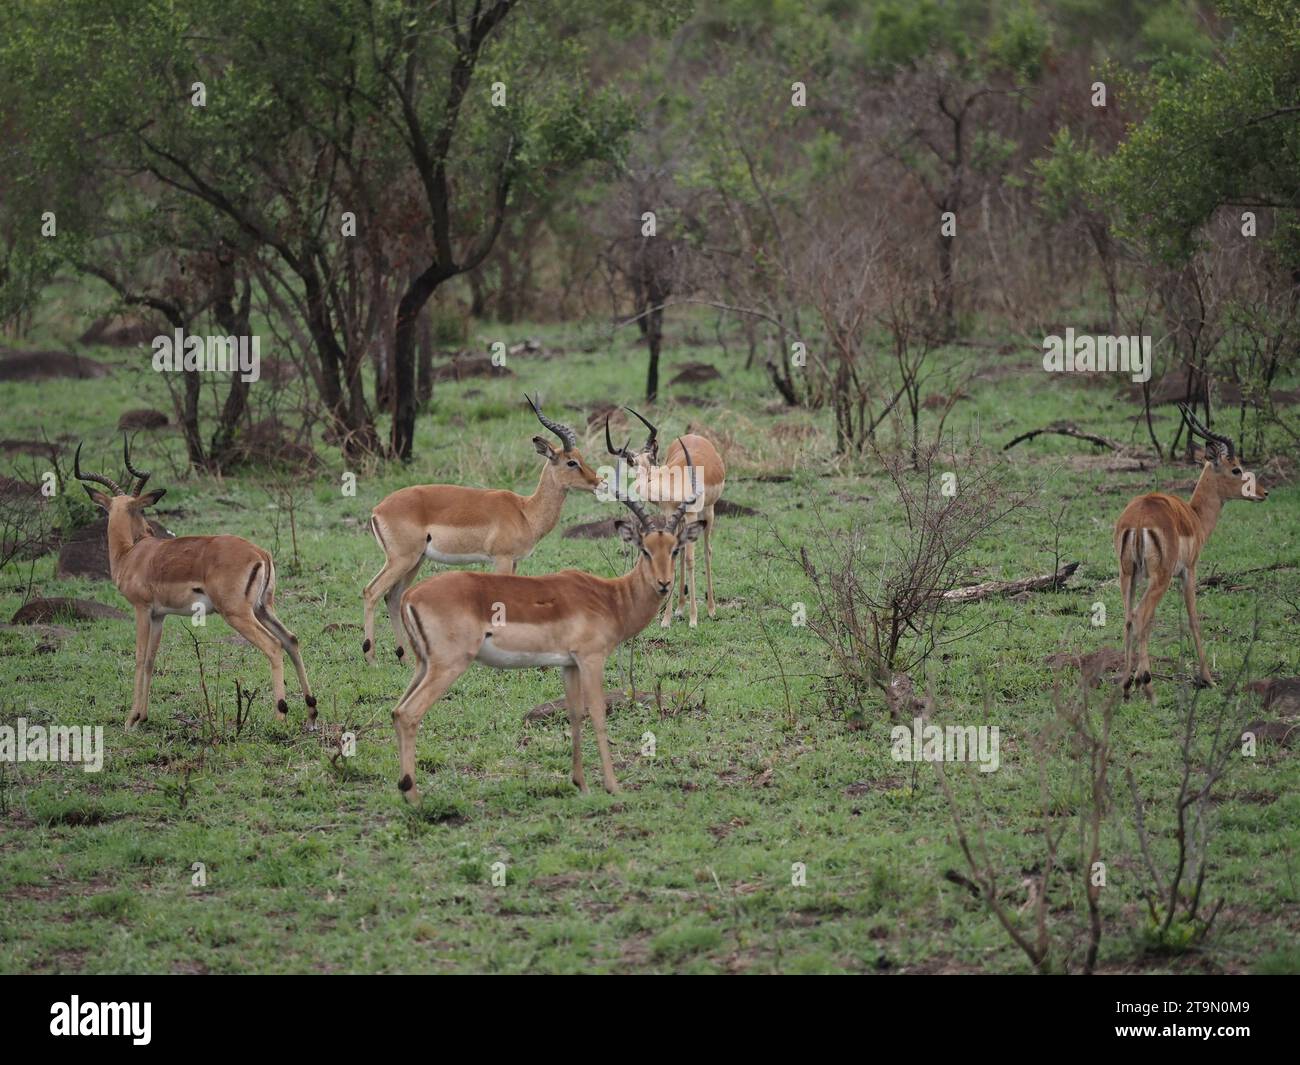 so called bachelor group of male impalas (aepyceros melampus) in the Kruger National Park near Skukuza, South Africa. Stock Photo